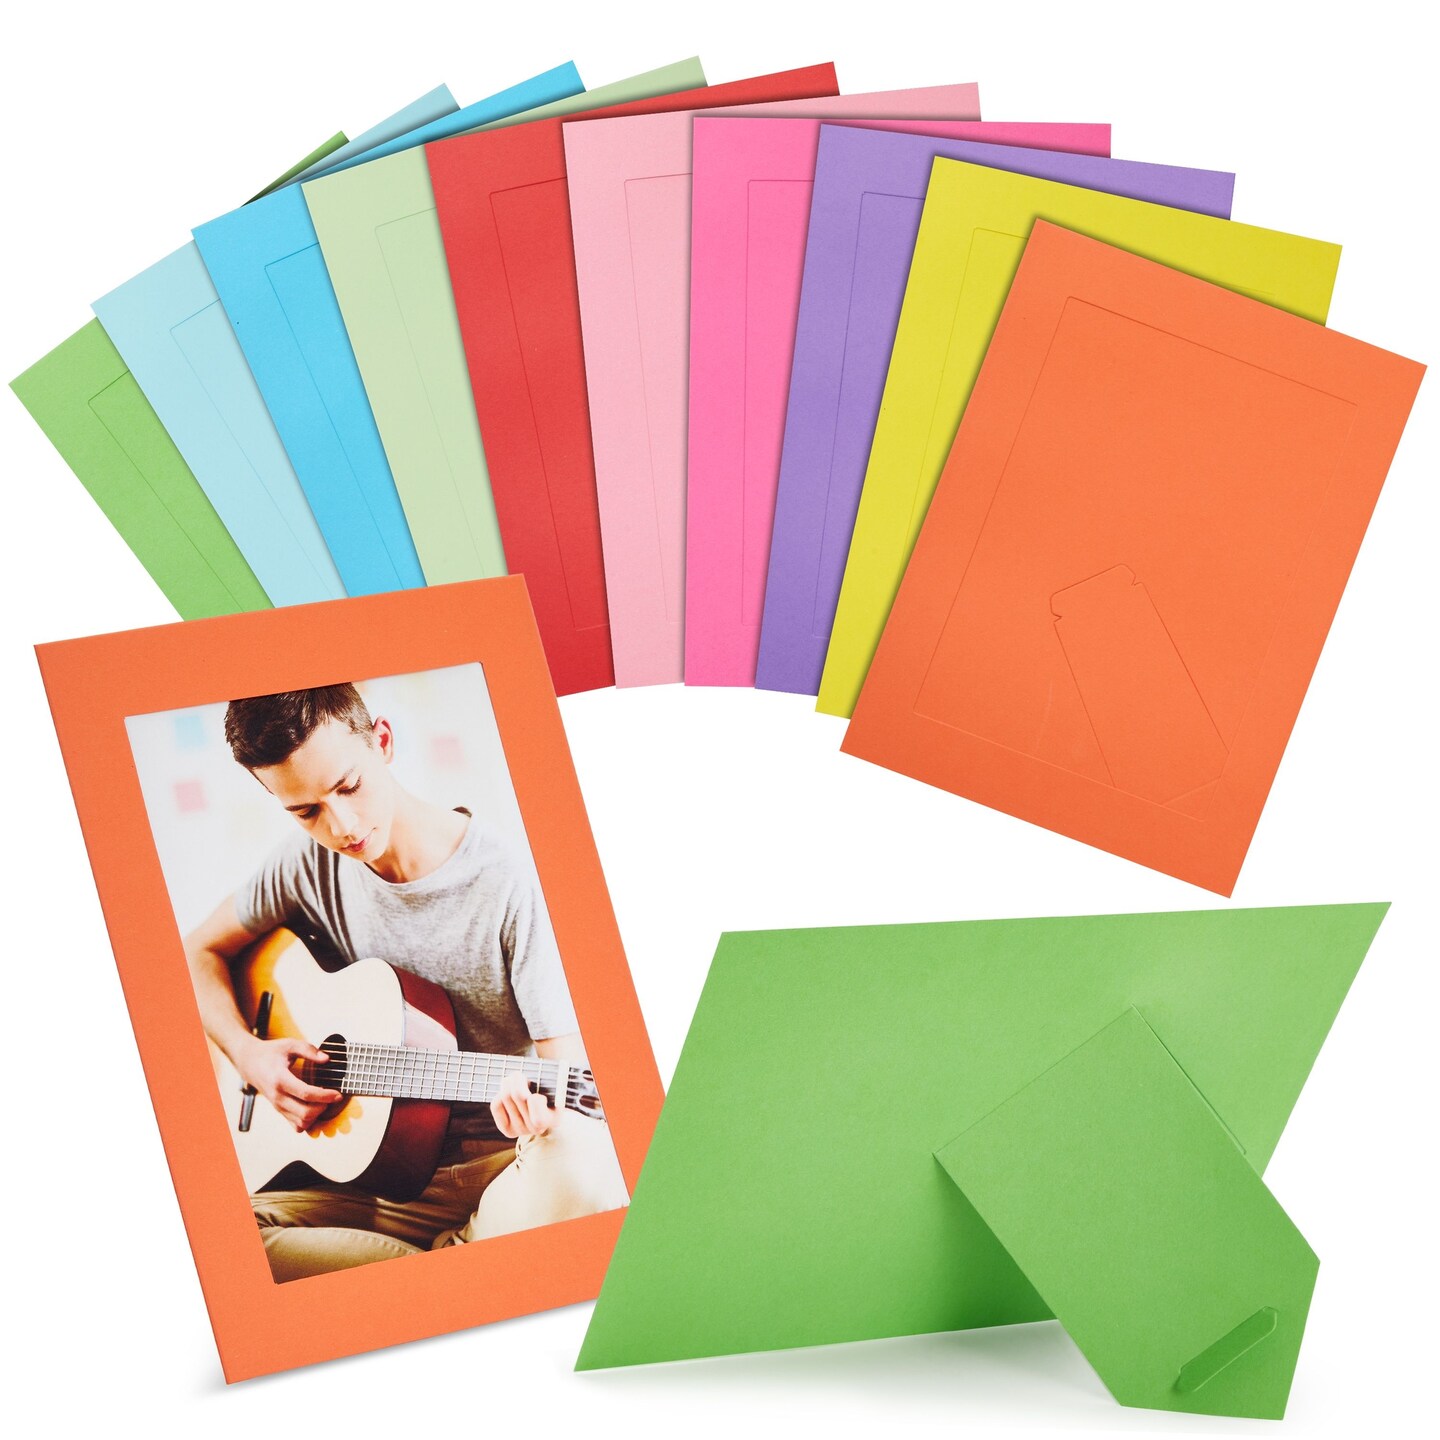 30 Pack Colorful 5x7 Paper Picture Frames, Cardboard Photo Easels for DIY,  Classroom Crafts, 10 Rainbow Colors